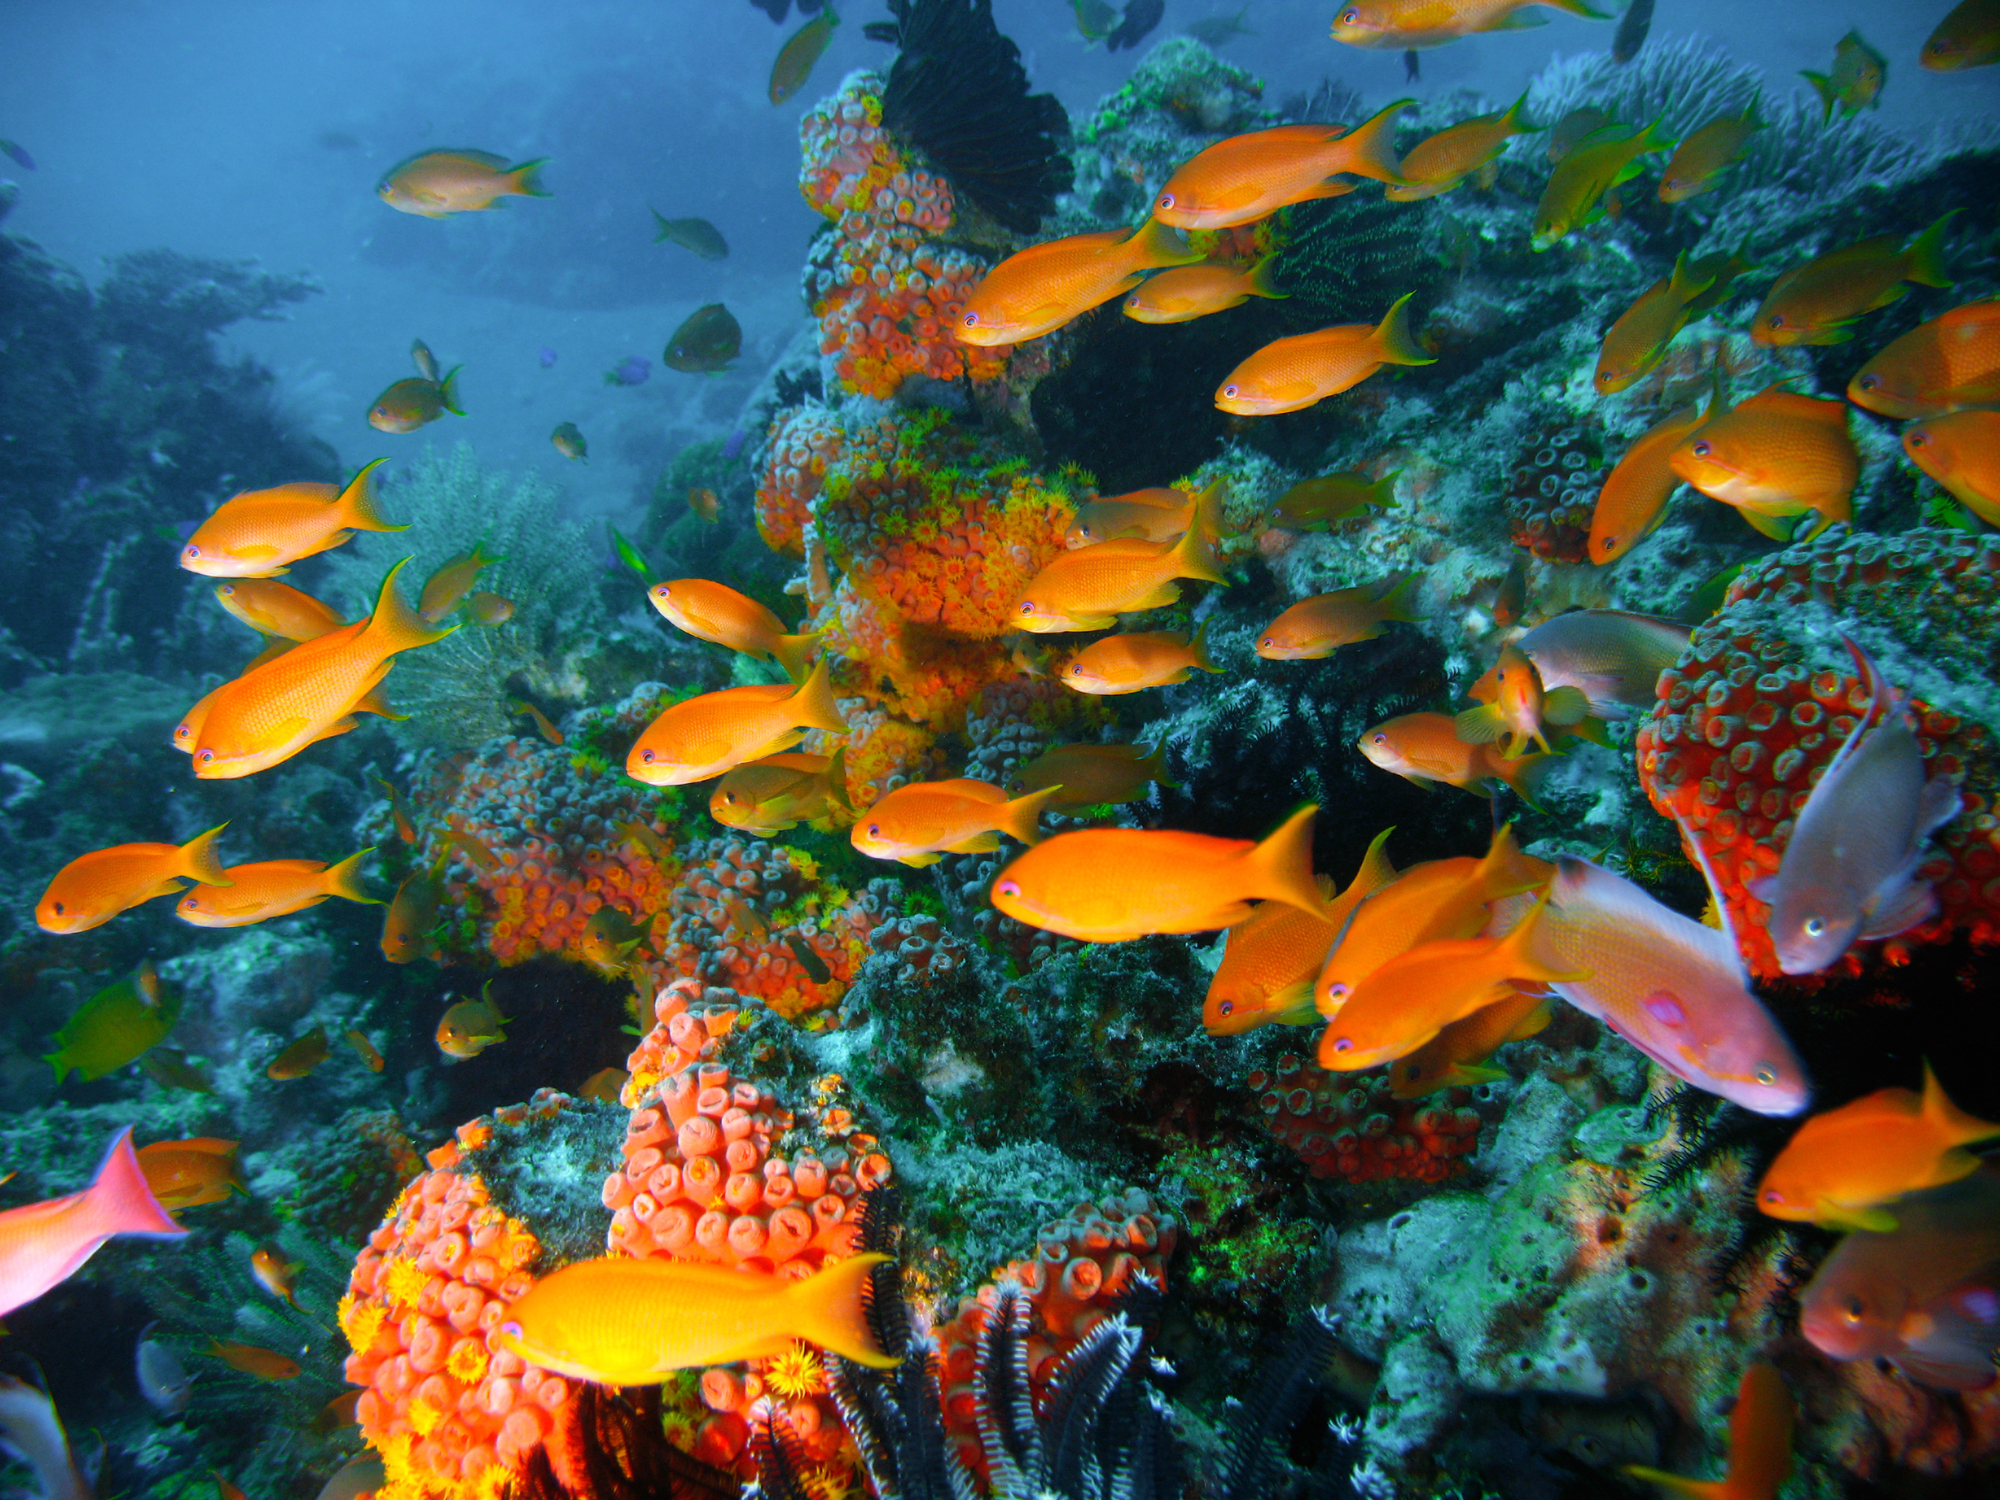 Study reveals fish soundscapes across restored coral reefs